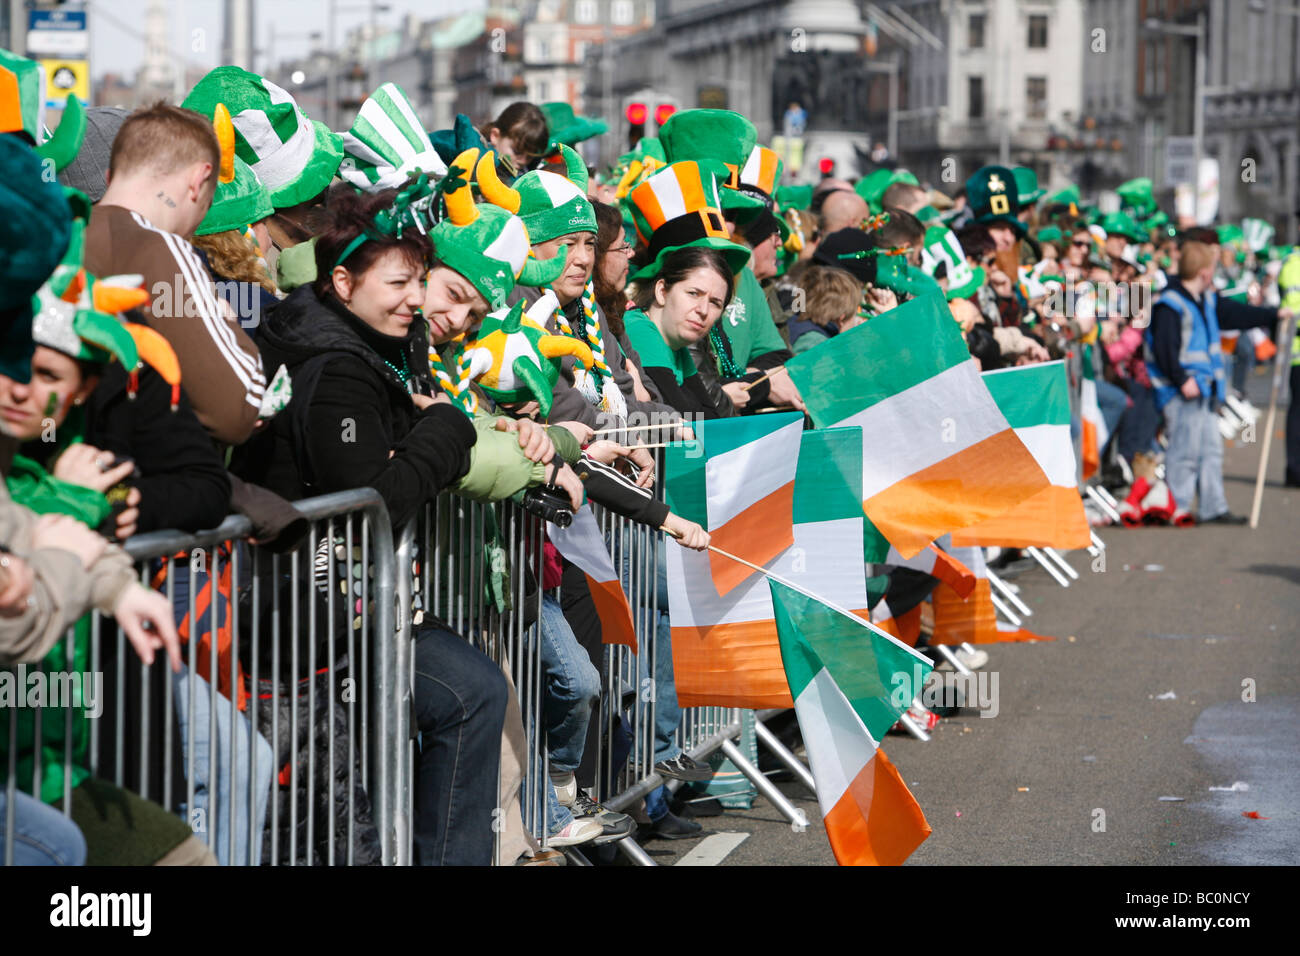 Onlooking crowd watching the 'St Patricks Day' 'Parade' Dublin Ireland with flags and hats a plenty! Stock Photo